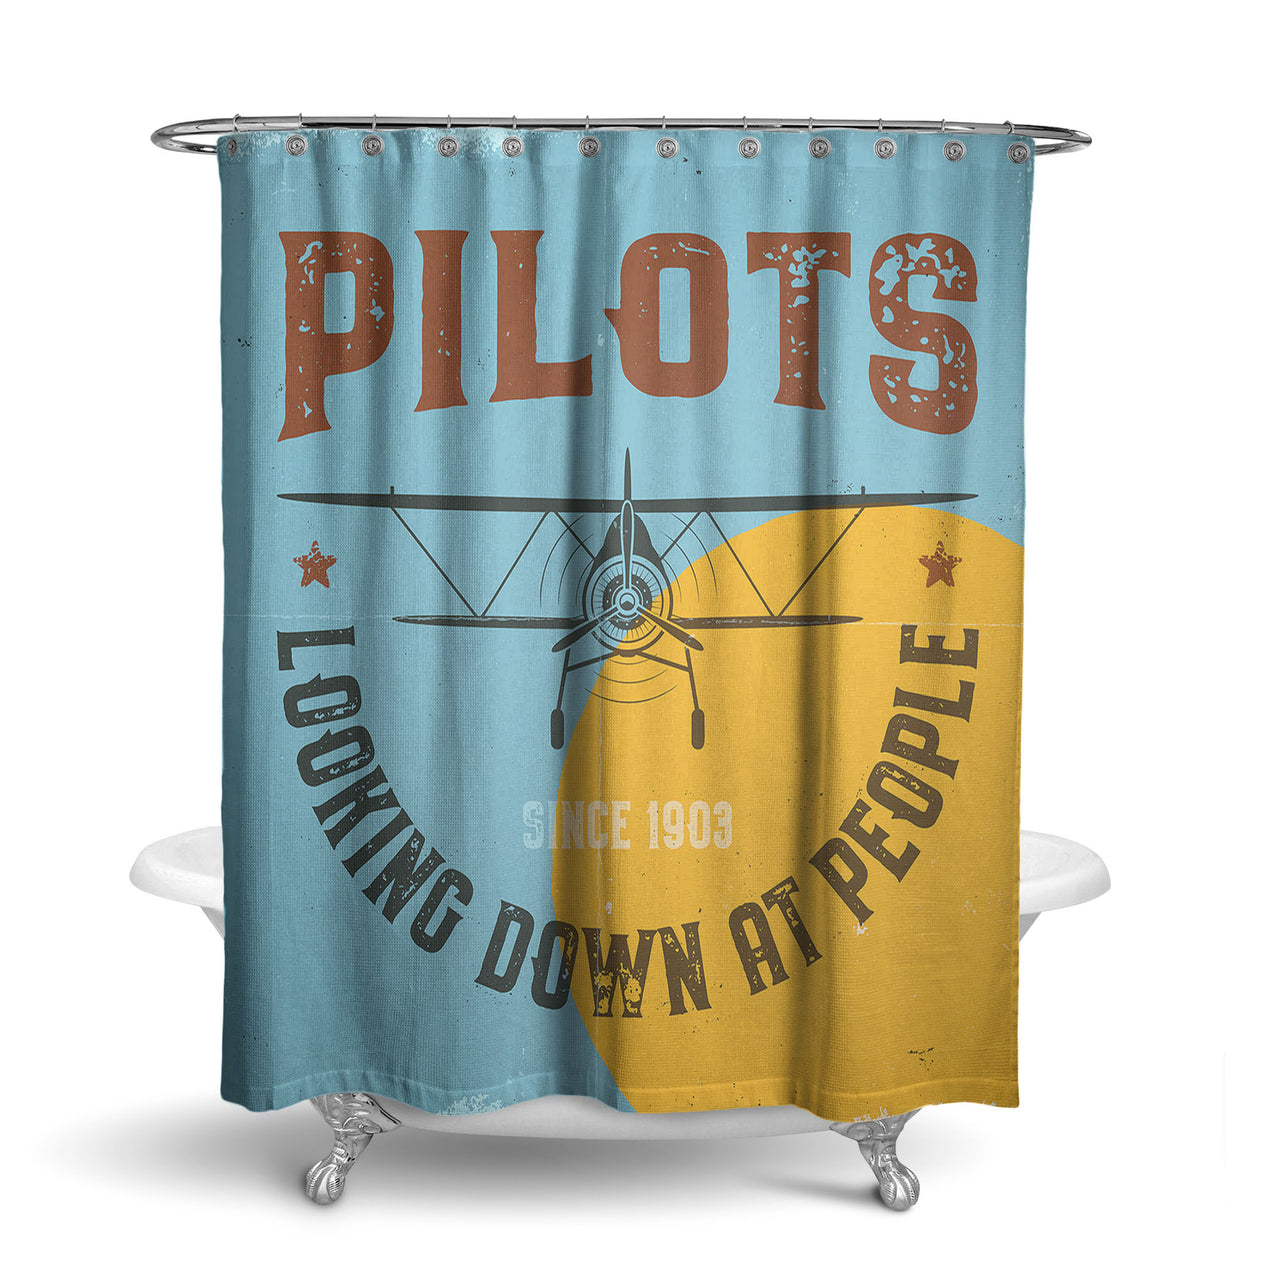 Pilots Looking Down at People Since 1903 Designed Shower Curtains